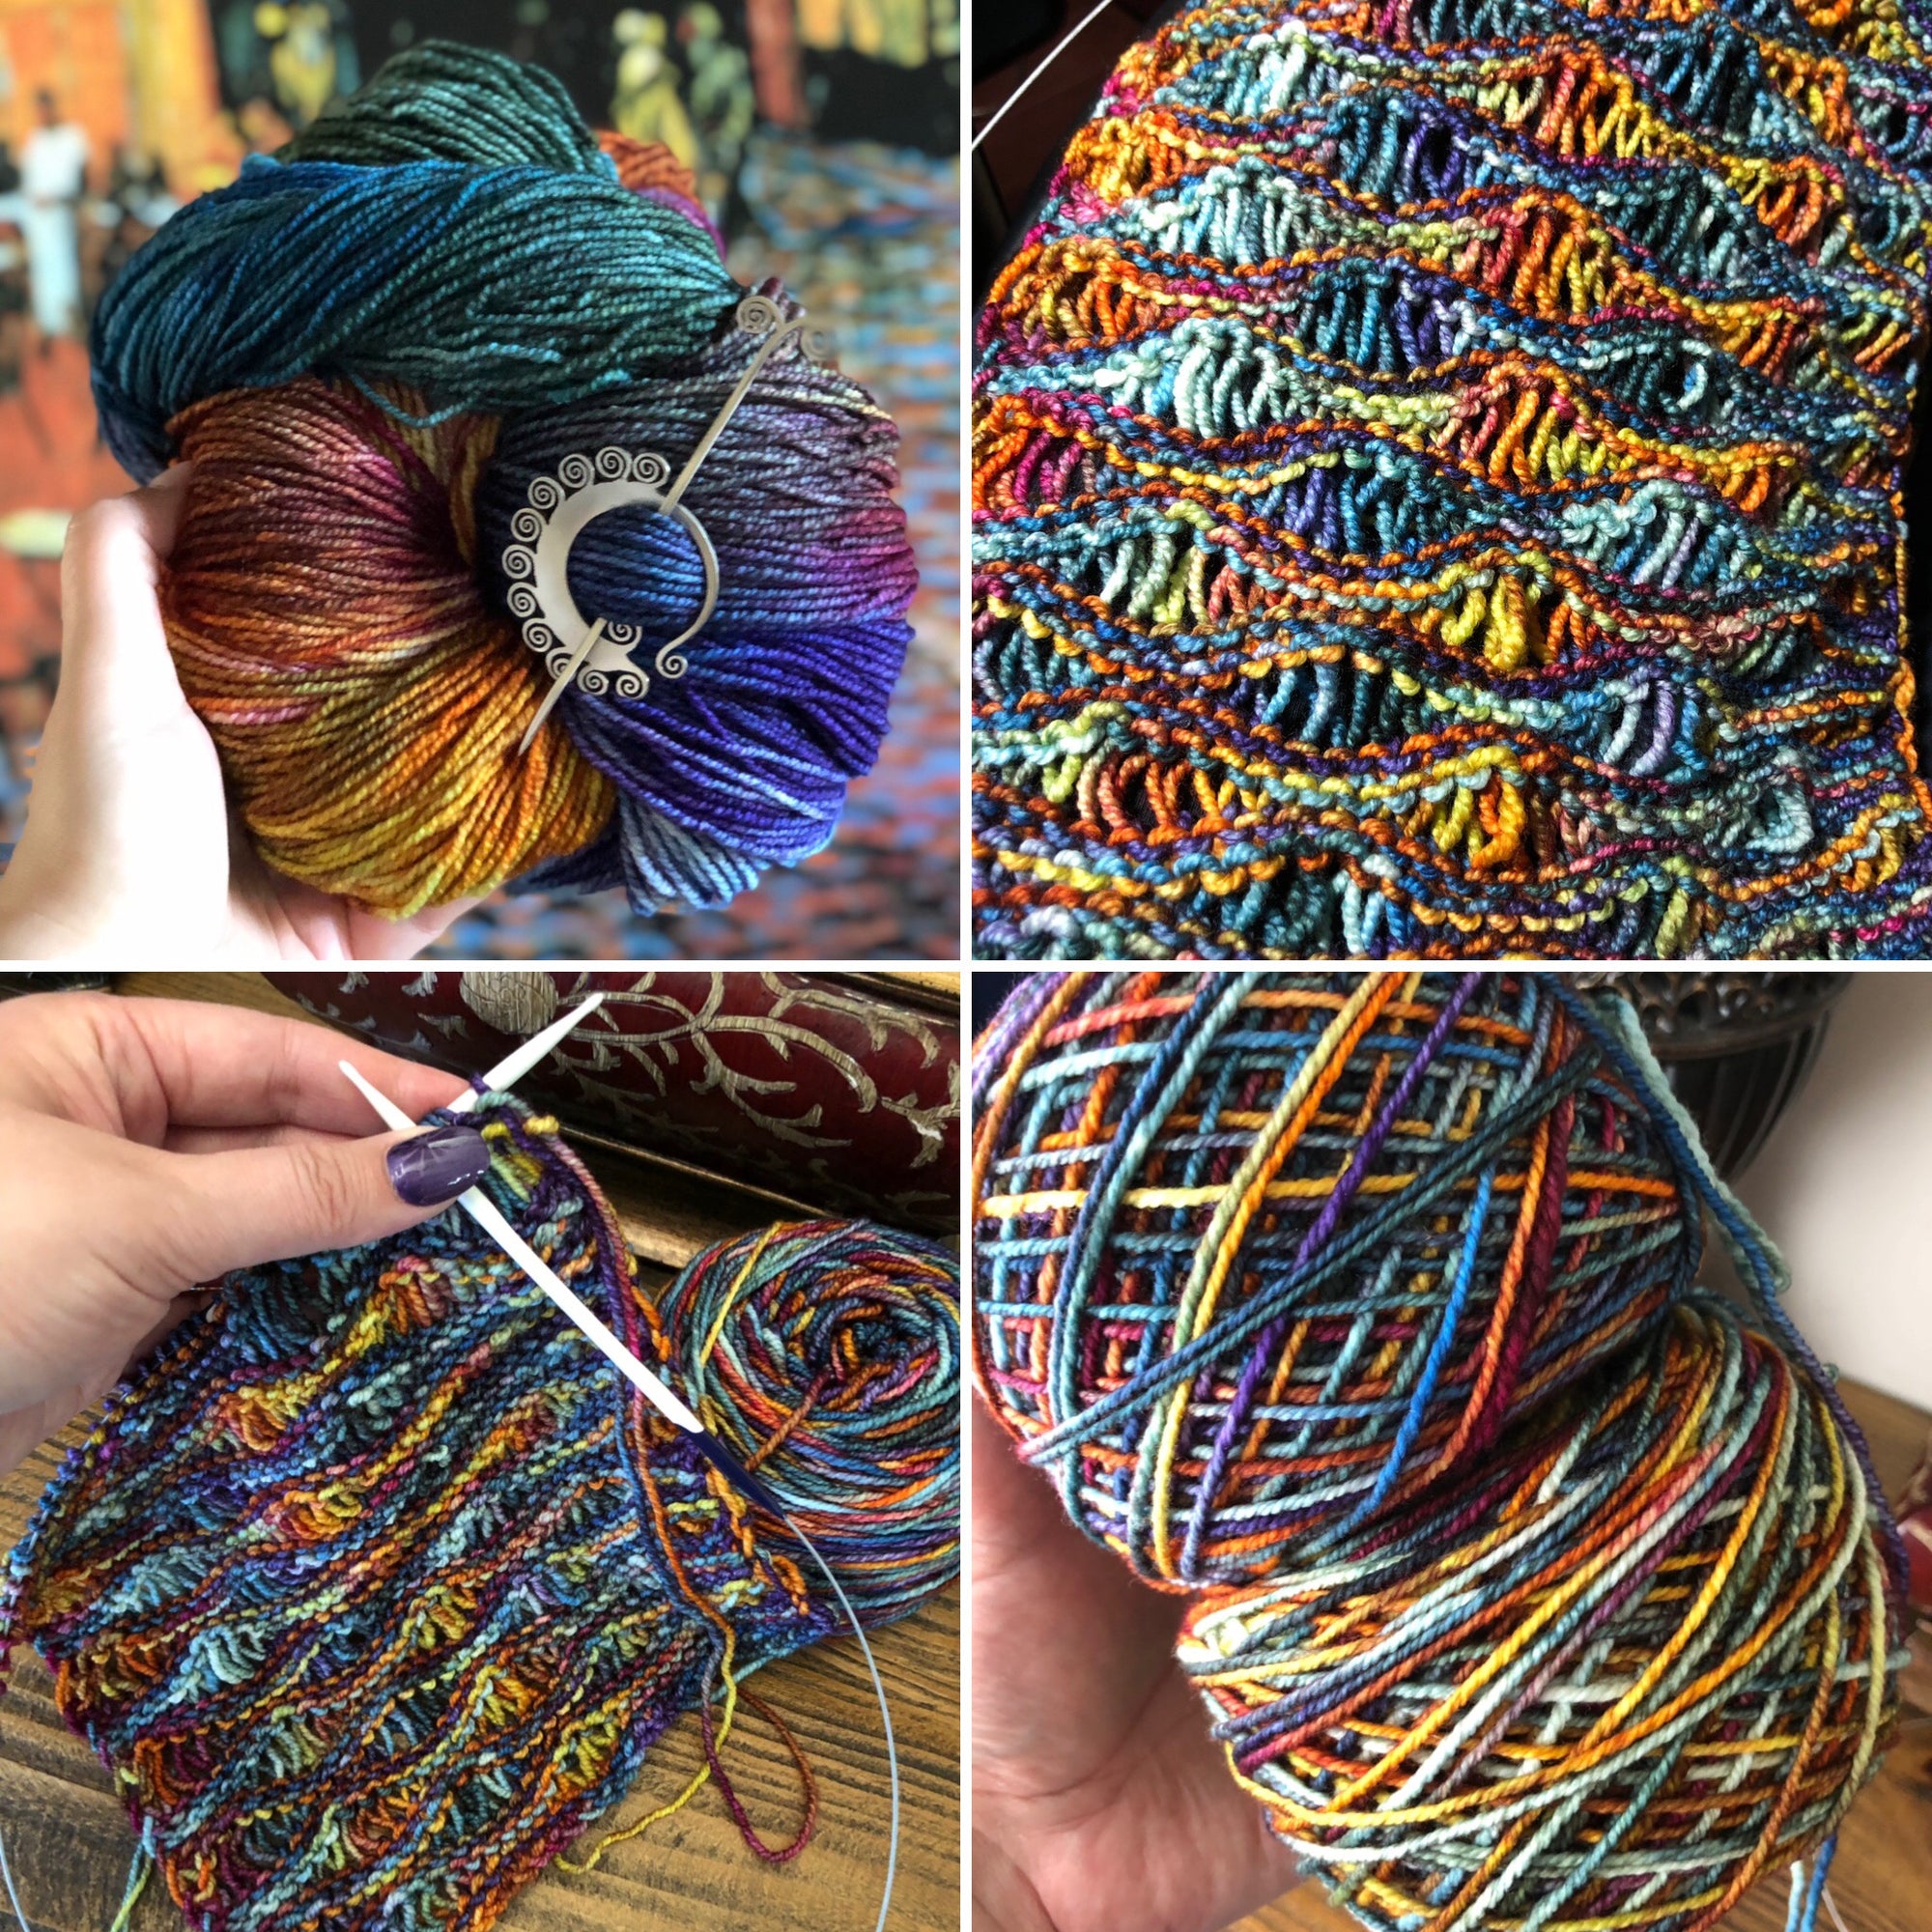 My skeins don't match! Now what?